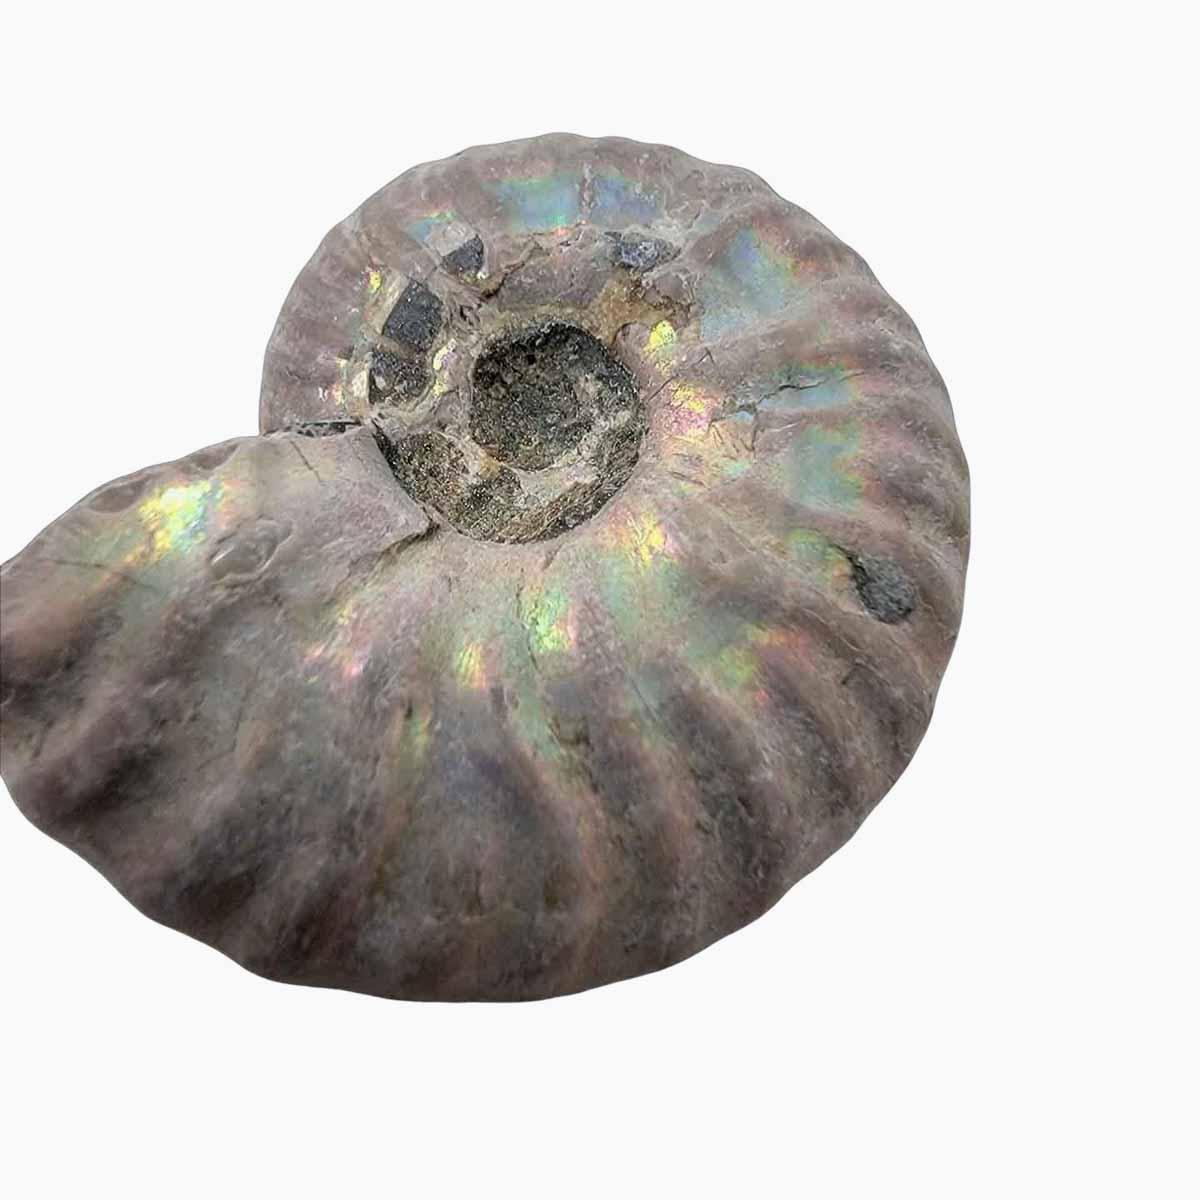 Silver Iridescent Ammonite Fossil!  110 Million Years Old! - LapidaryCentral